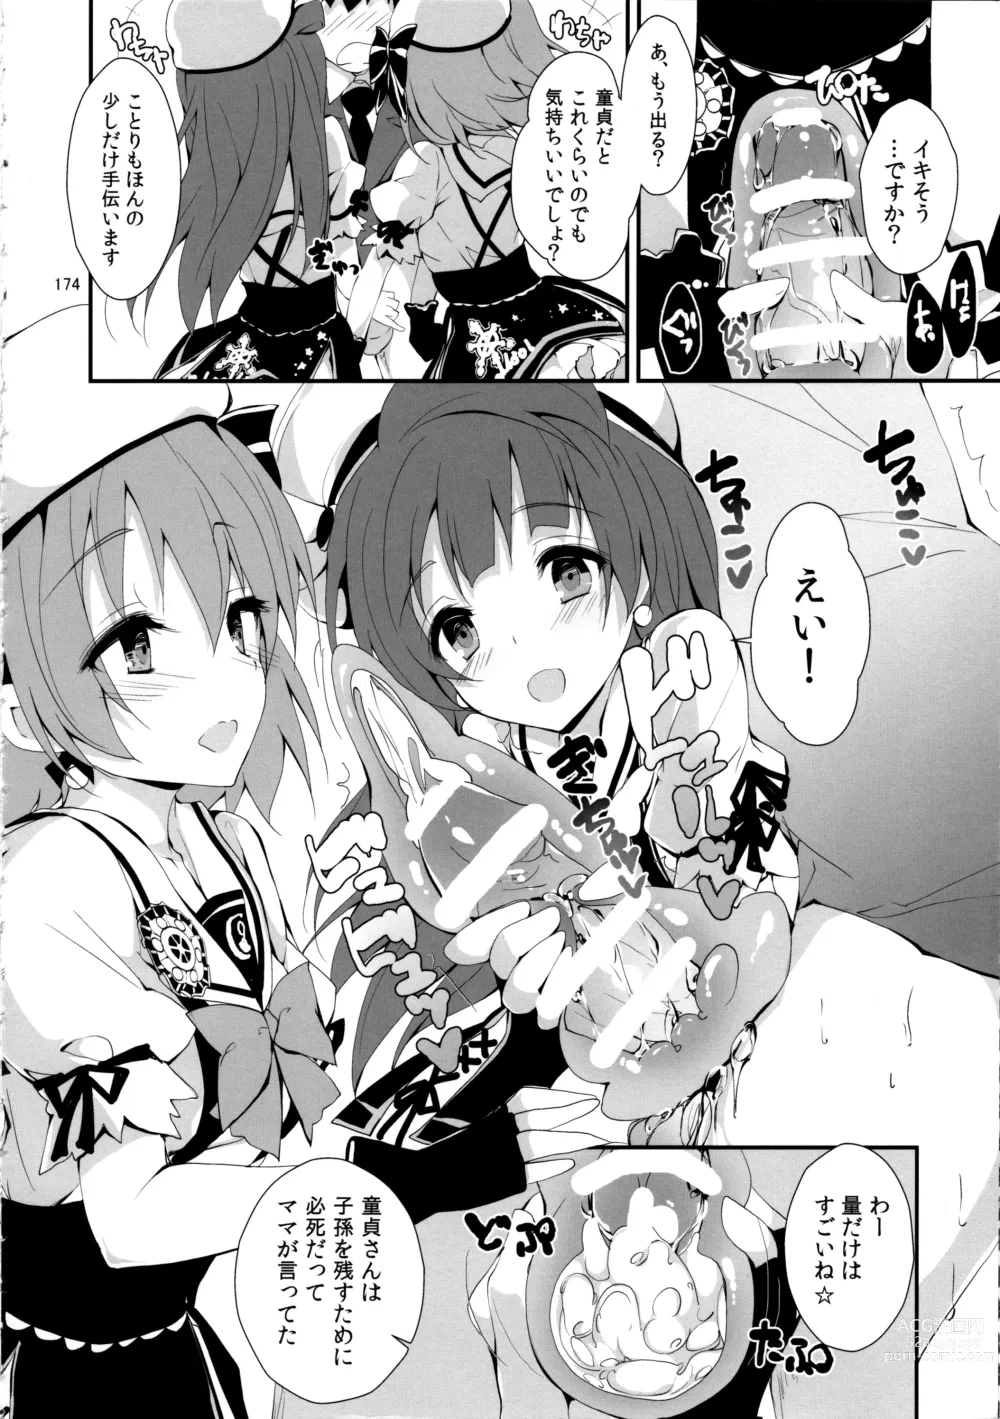 Page 177 of doujinshi Elo Live! collection IV